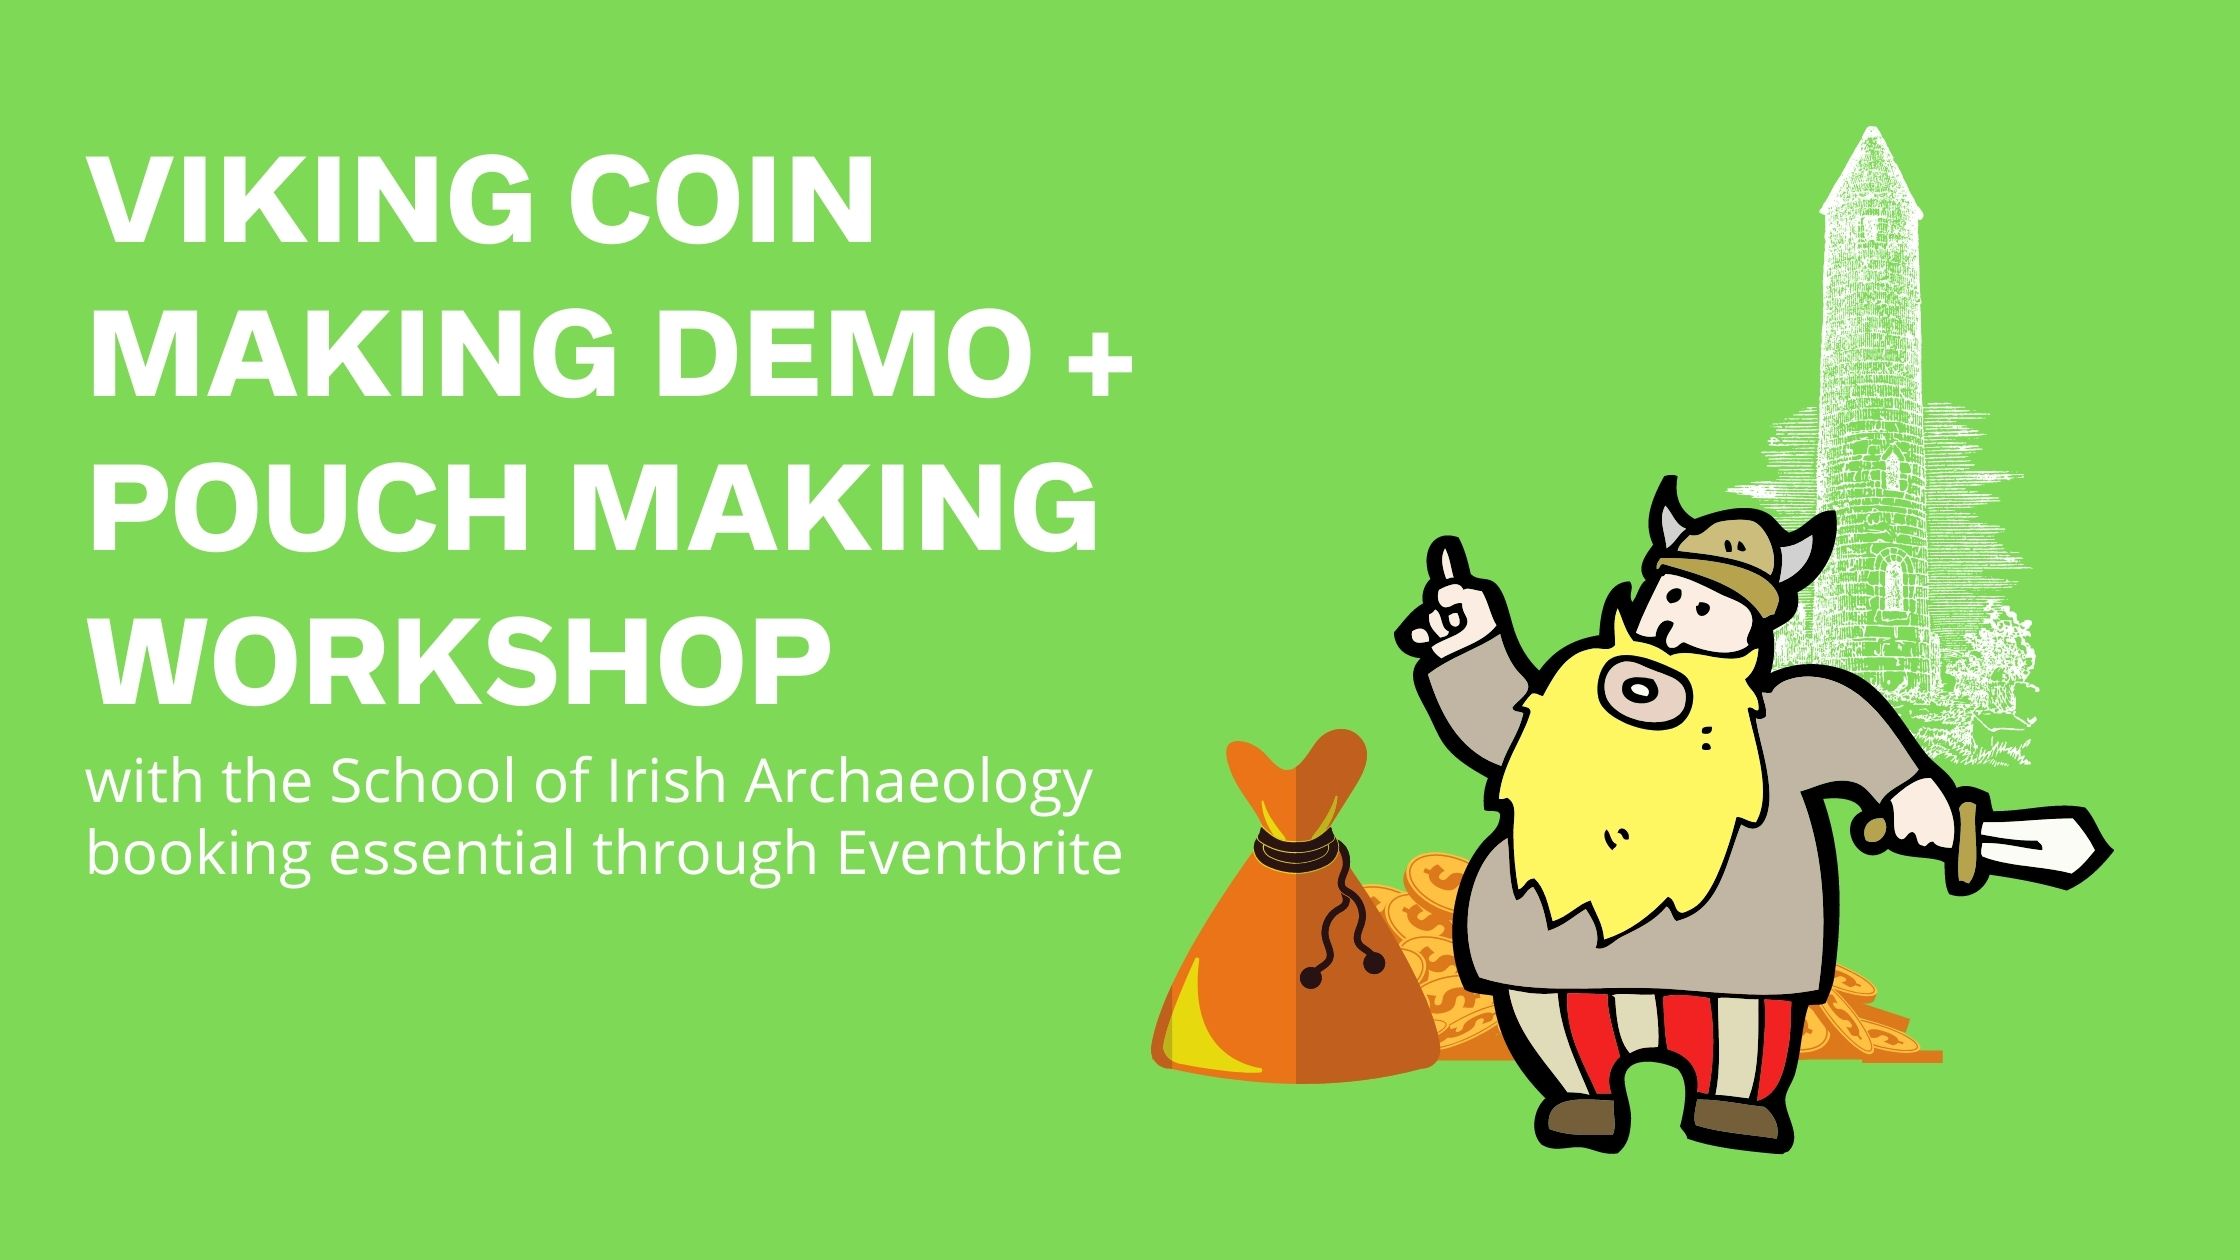 Outdoor Viking Coin Making Demonstration and Pouch Making Workshop sumamry image